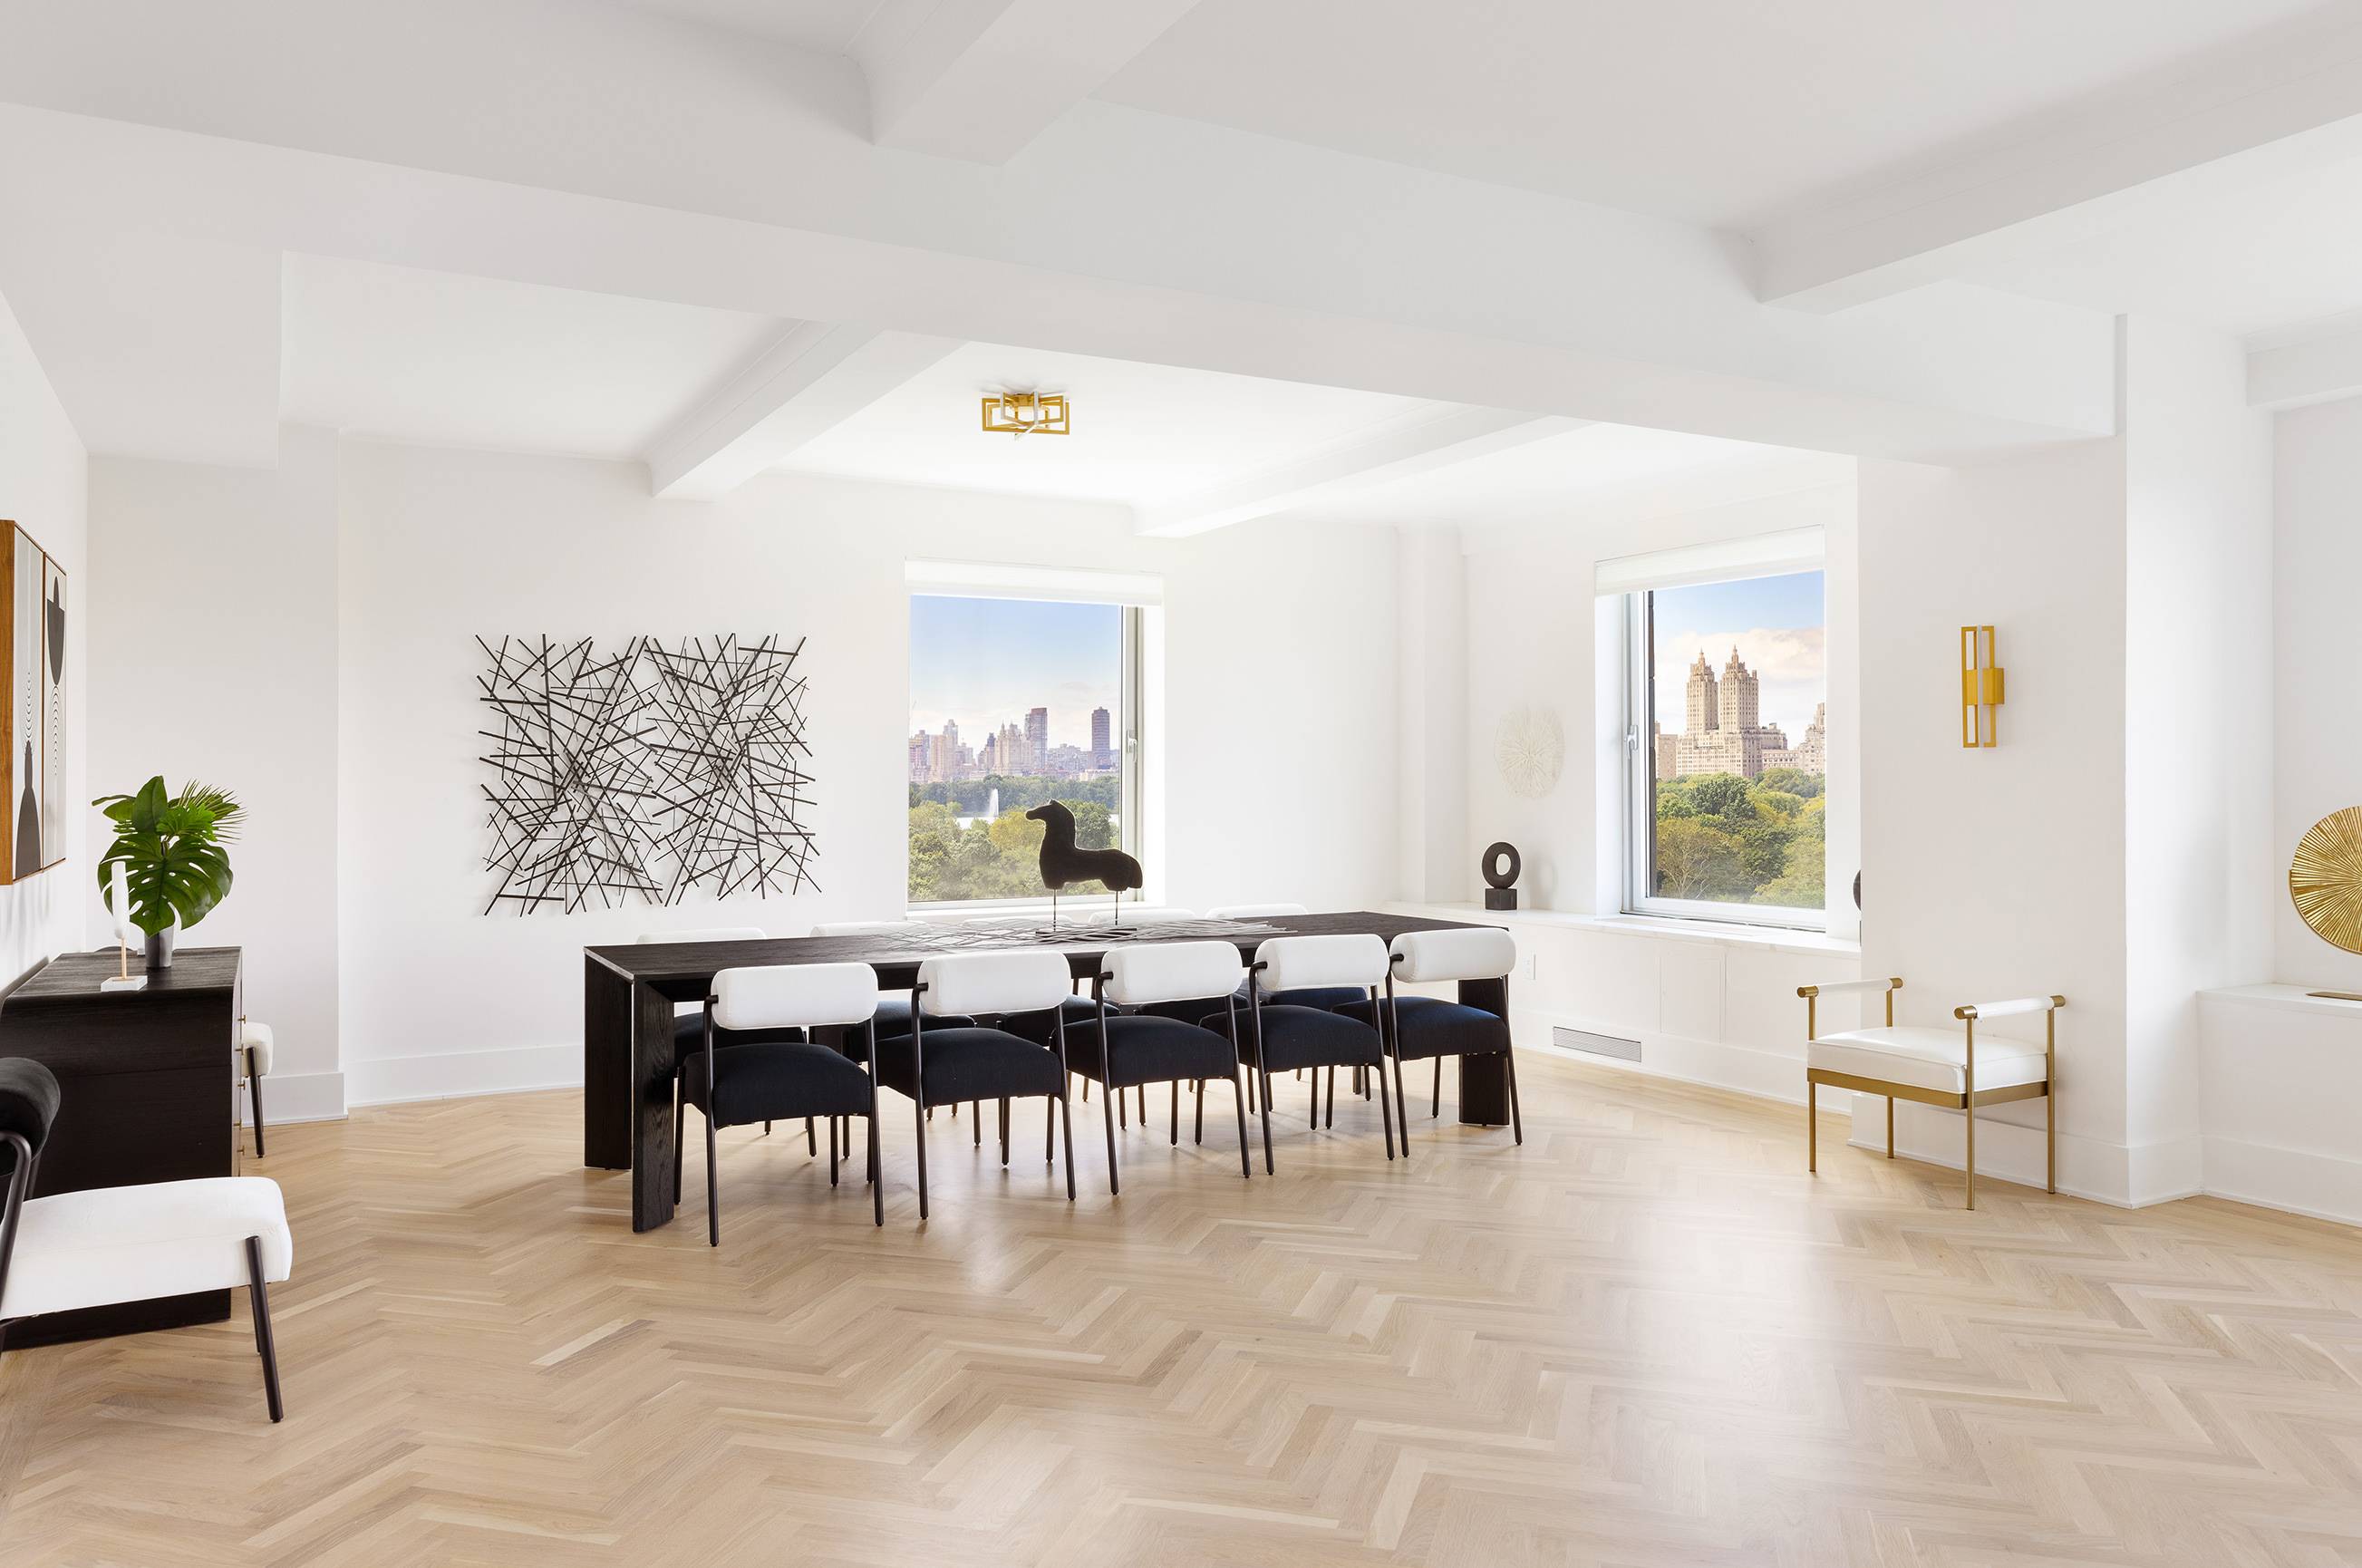 Fifth Avenue State Of The Art Apartment With Central Park Views !!